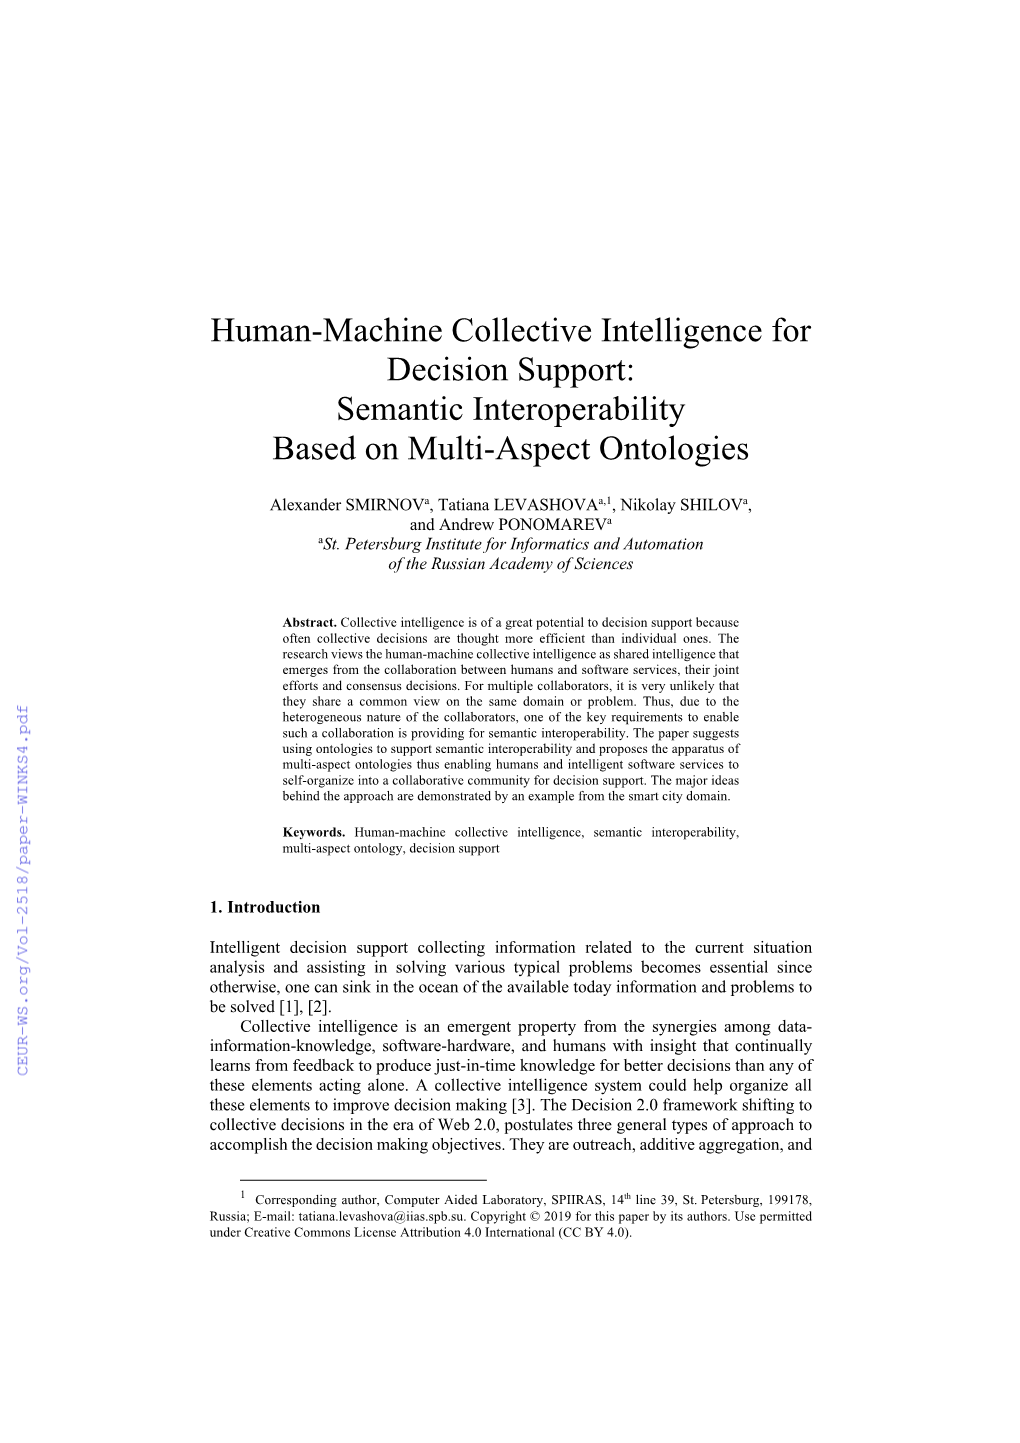 Human-Machine Collective Intelligence for Decision Support: Semantic Interoperability Based on Multi-Aspect Ontologies